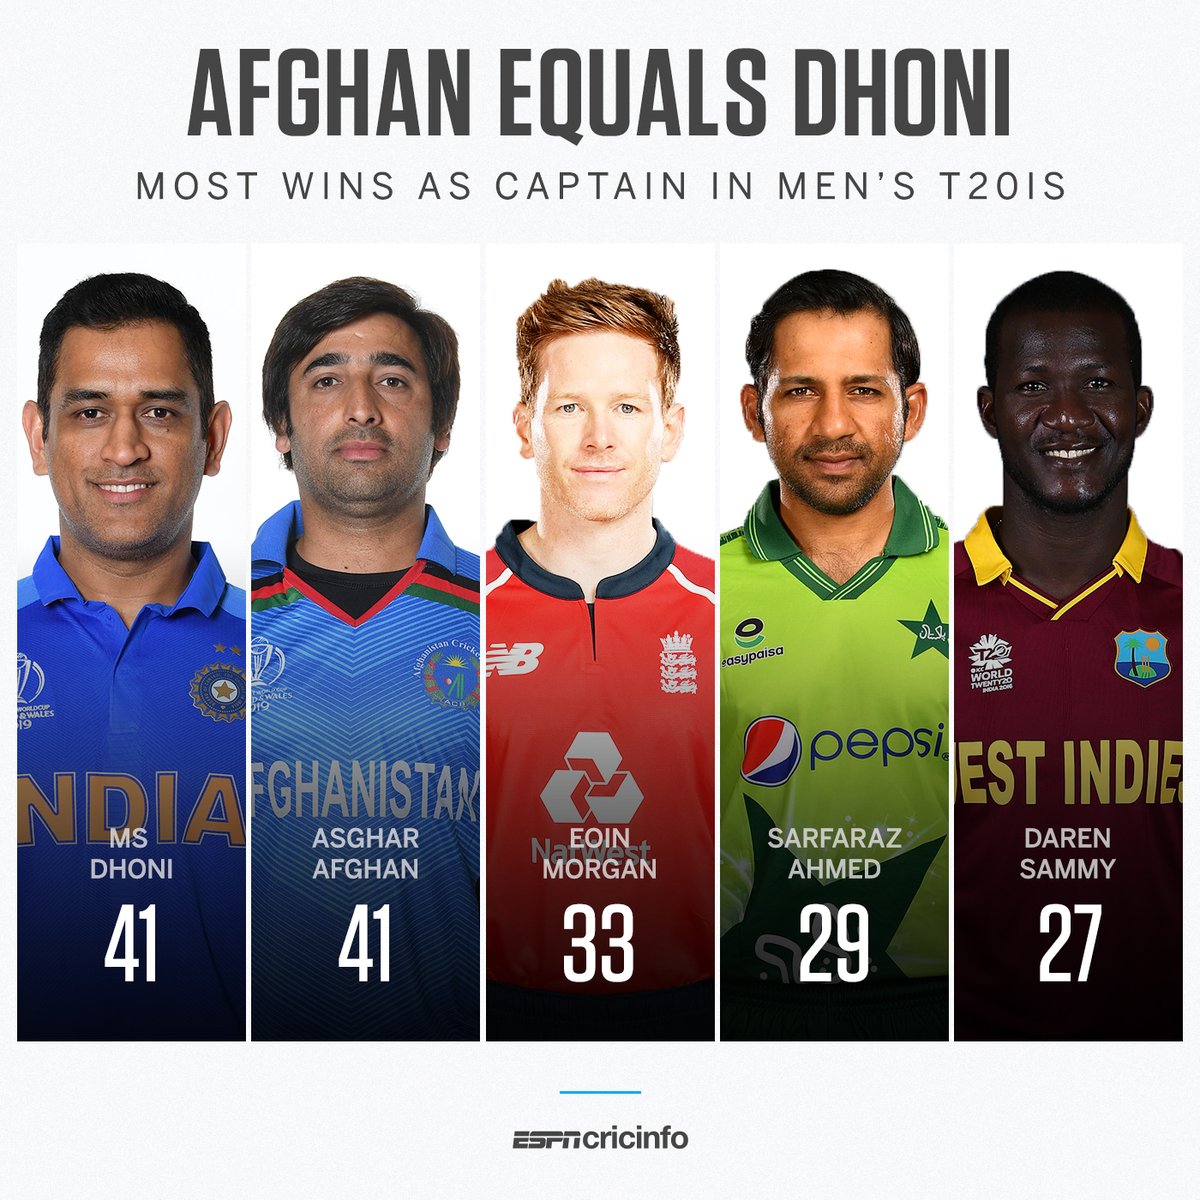 Asghar Afghan has equalled MS Dhoni's record for the most wins as captain in men's T20Is 👏